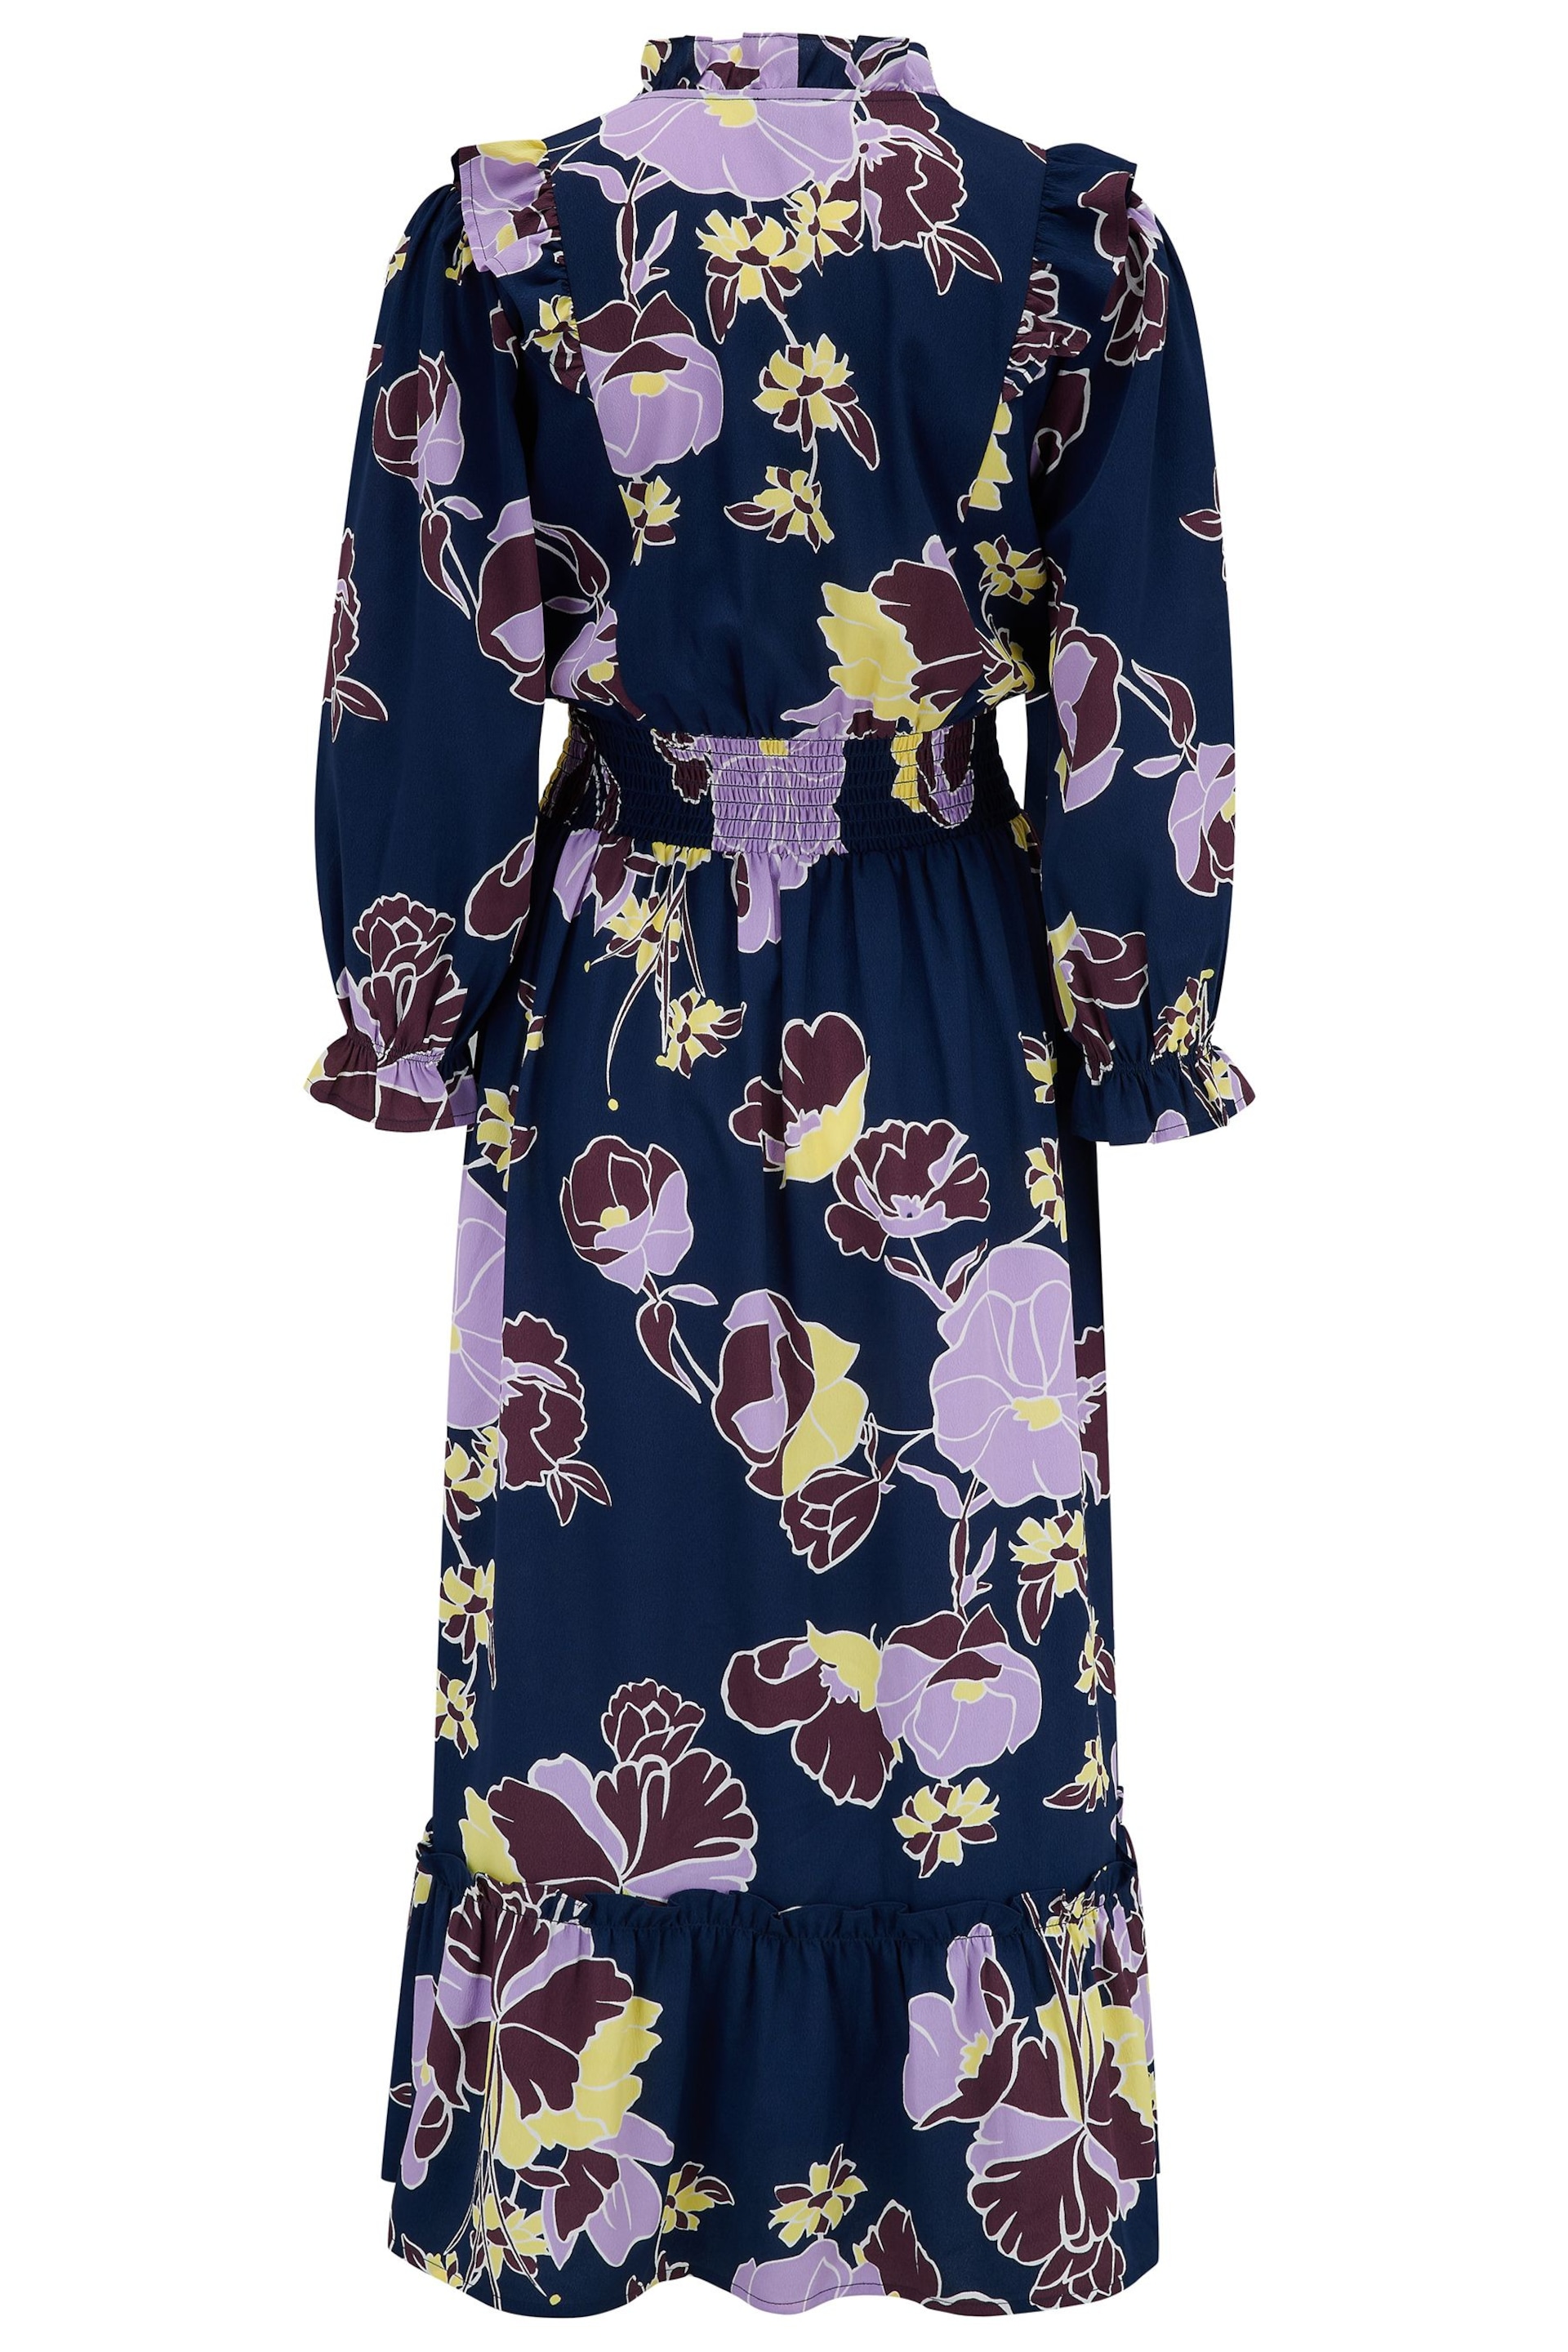 Pour Moi Navy Floral Print Maggie Recycled Dress - Image 5 of 5